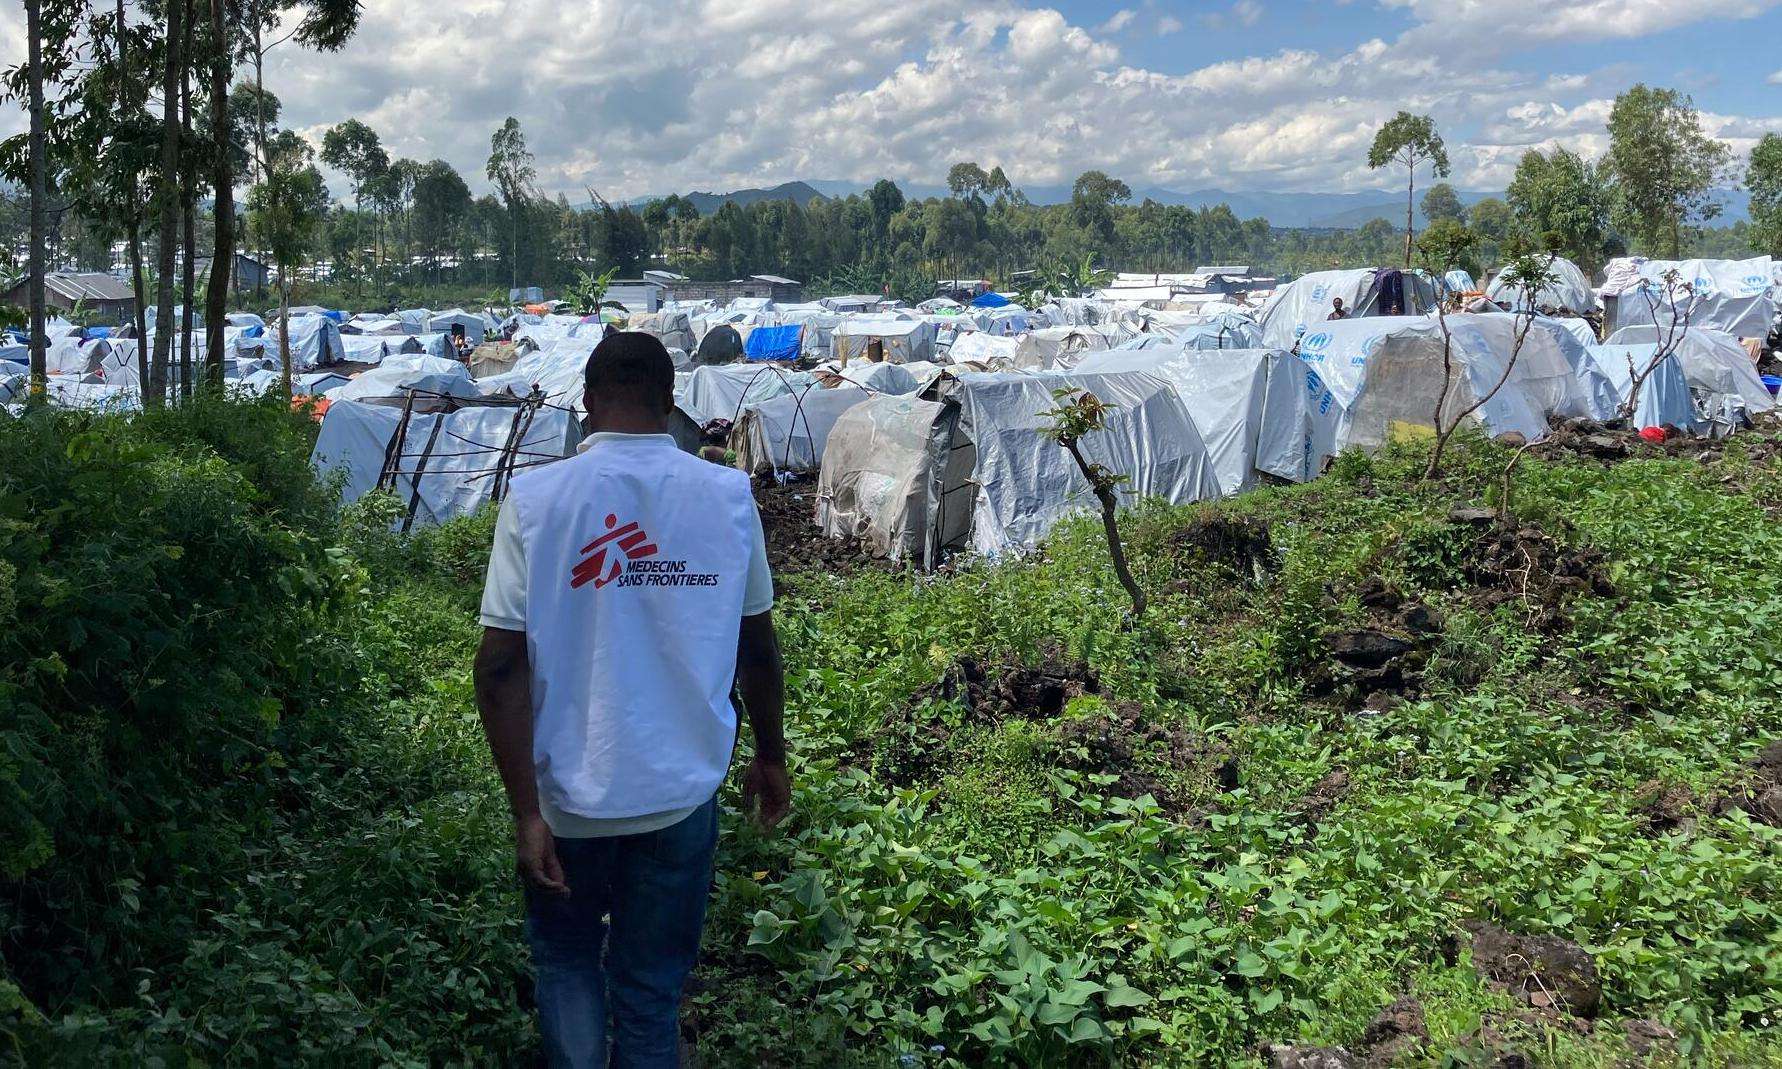 Camps of internally displaced people in and around Goma